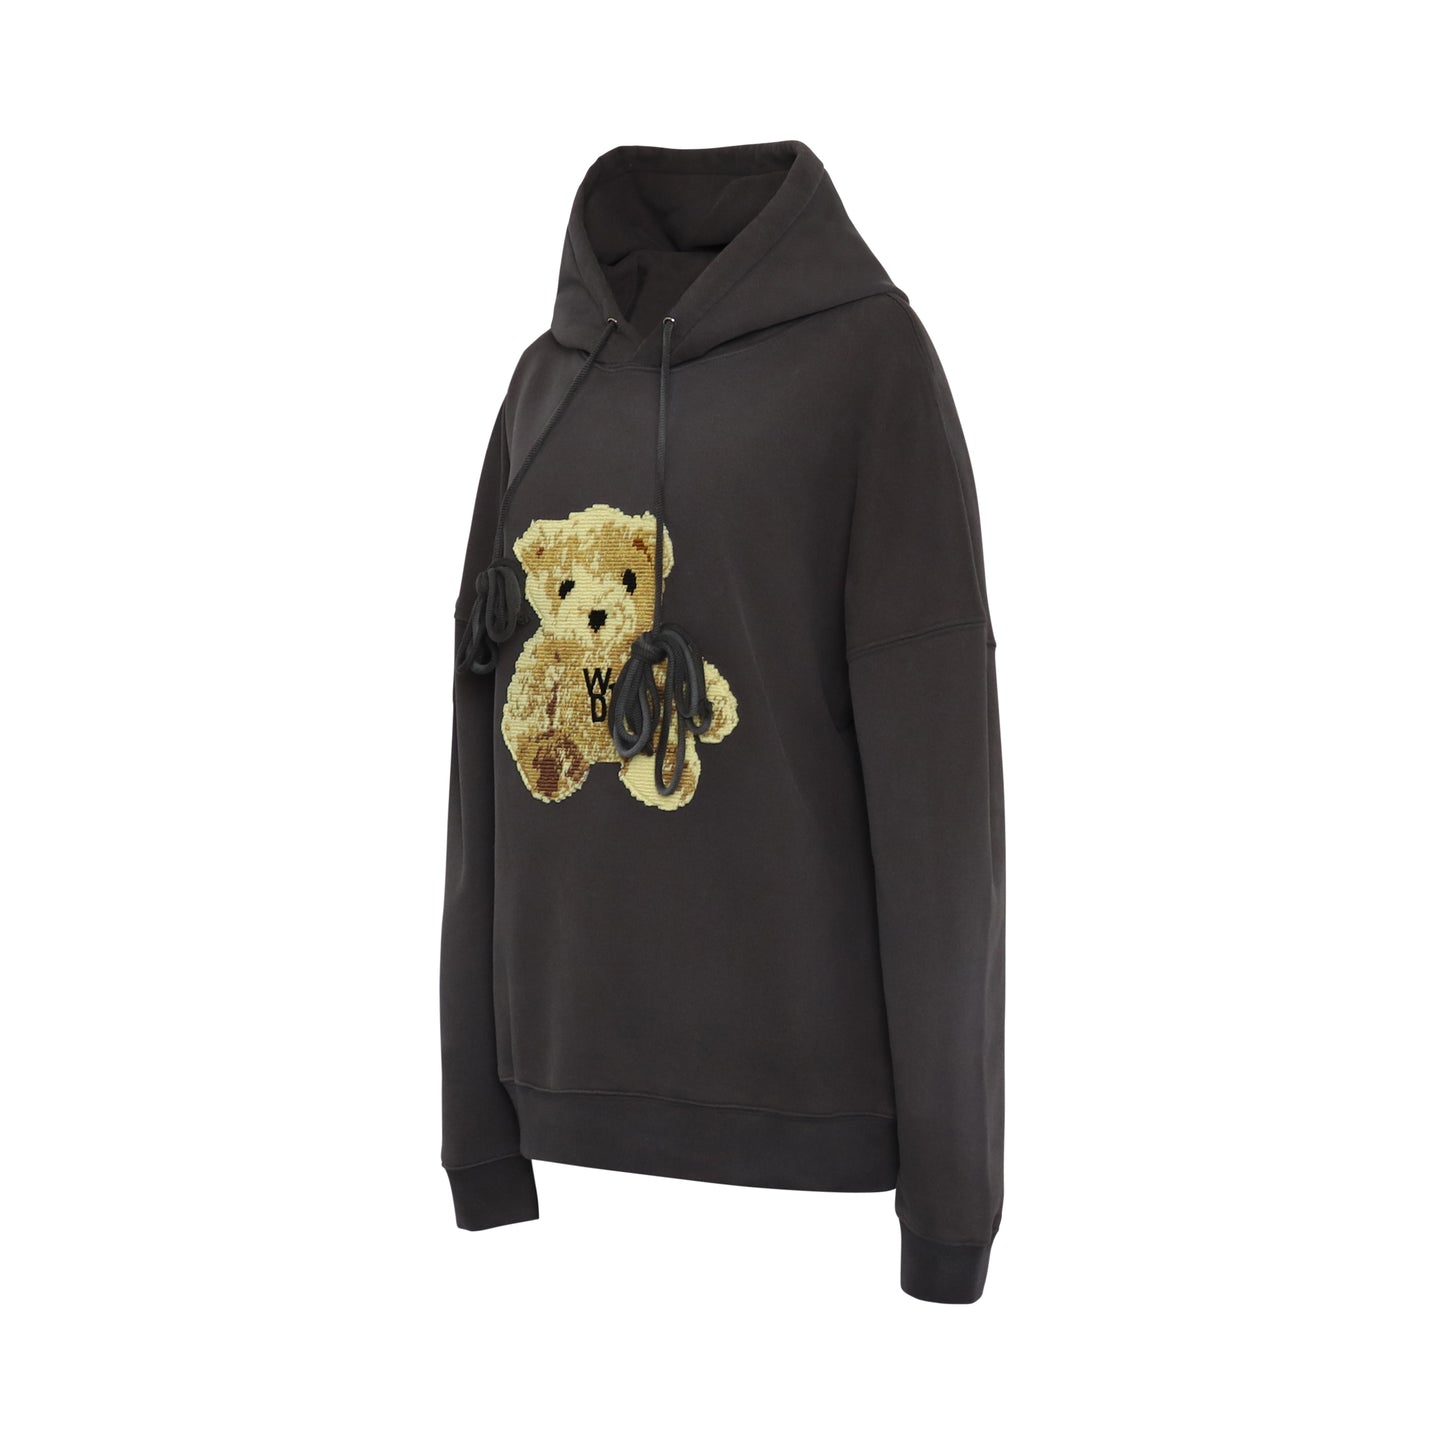 Embroidered Teddy Hoodie in Black